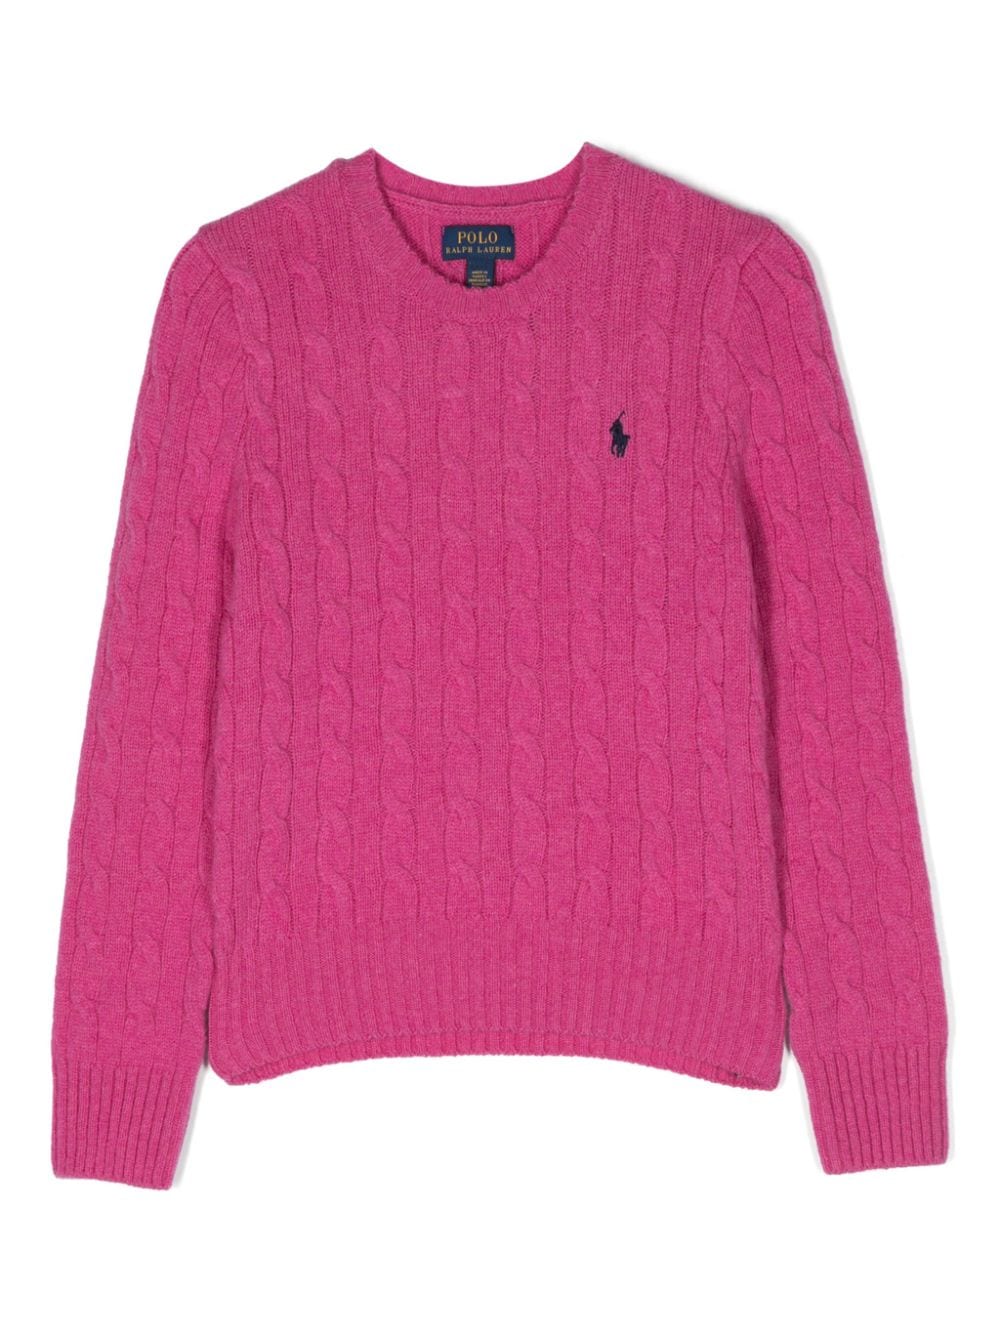 Ralph Lauren Polo Pony-embroidered Cable-knit Jumper In Pink